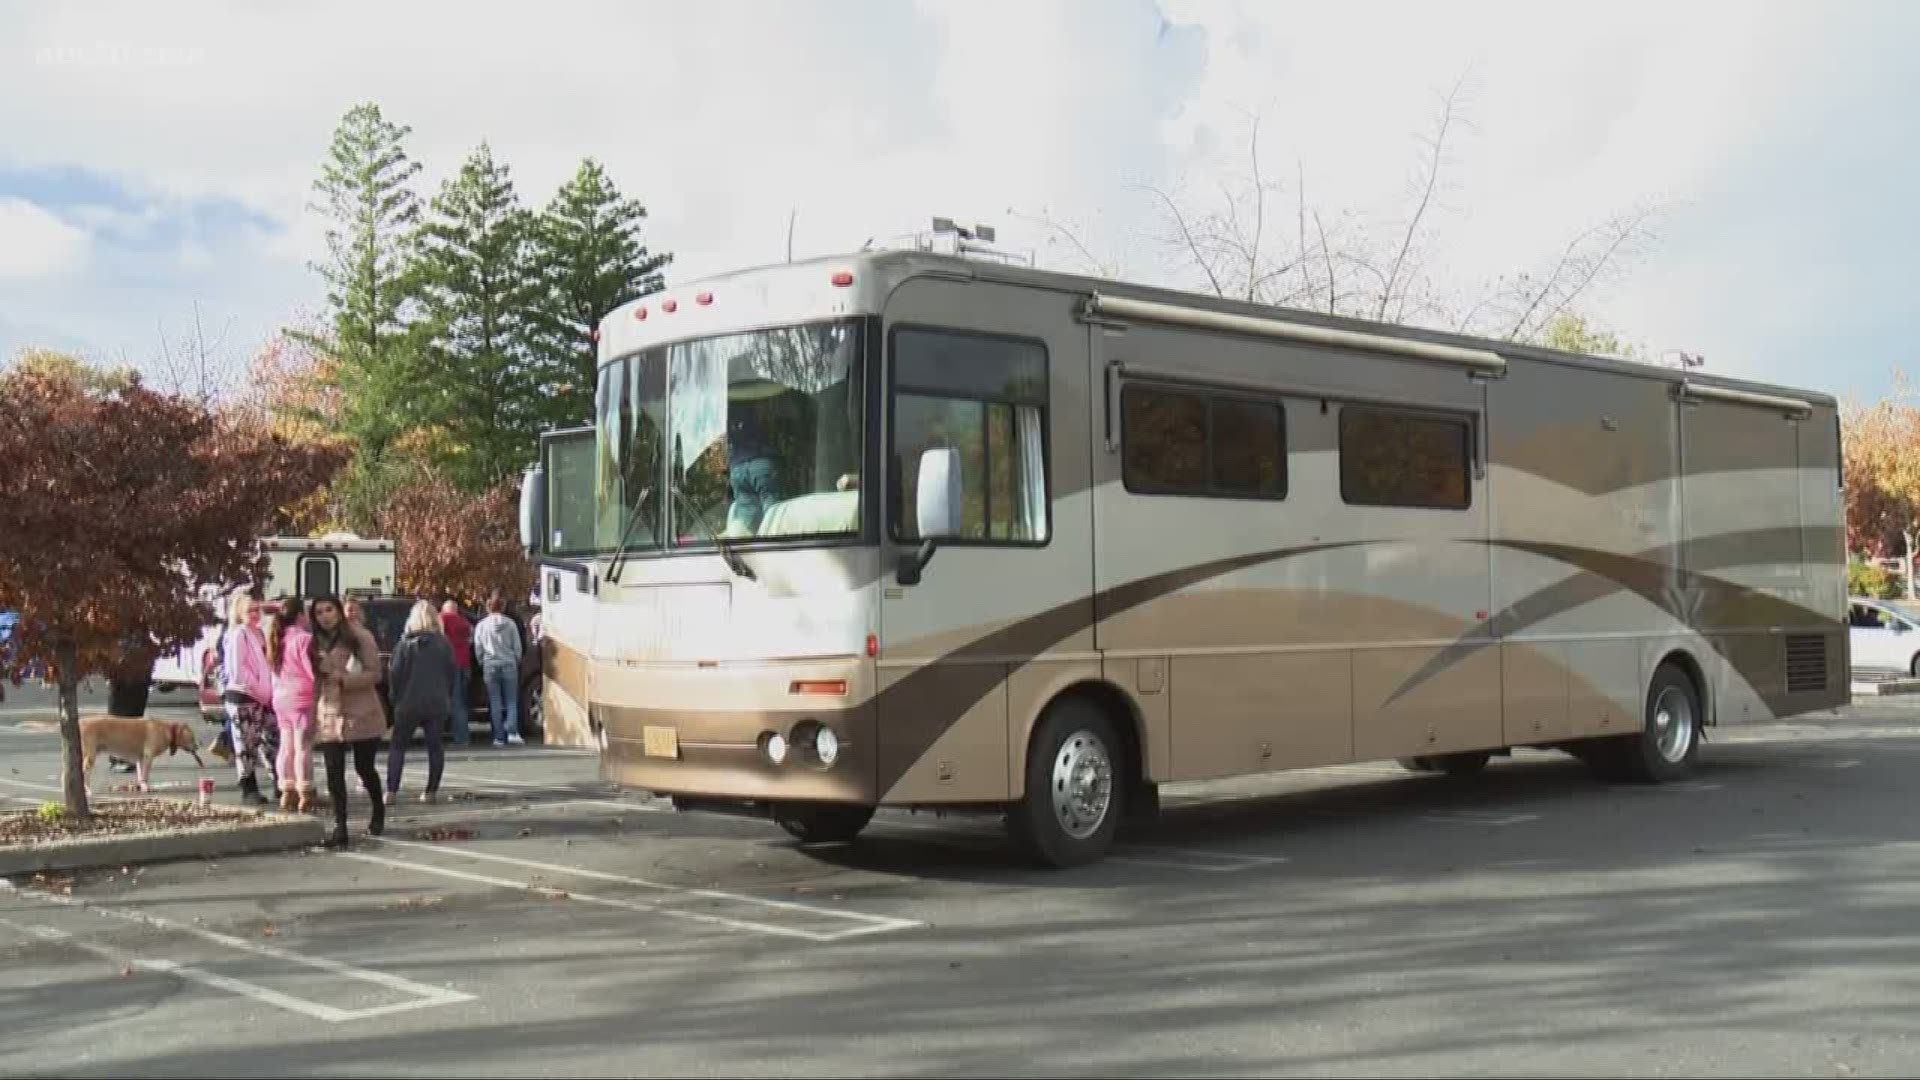 Patrick and Barbara Whitmore drove over 8 hours from Beavercreek, Oregon to donate their RV to a single mother who lost her home in the Camp Fire.